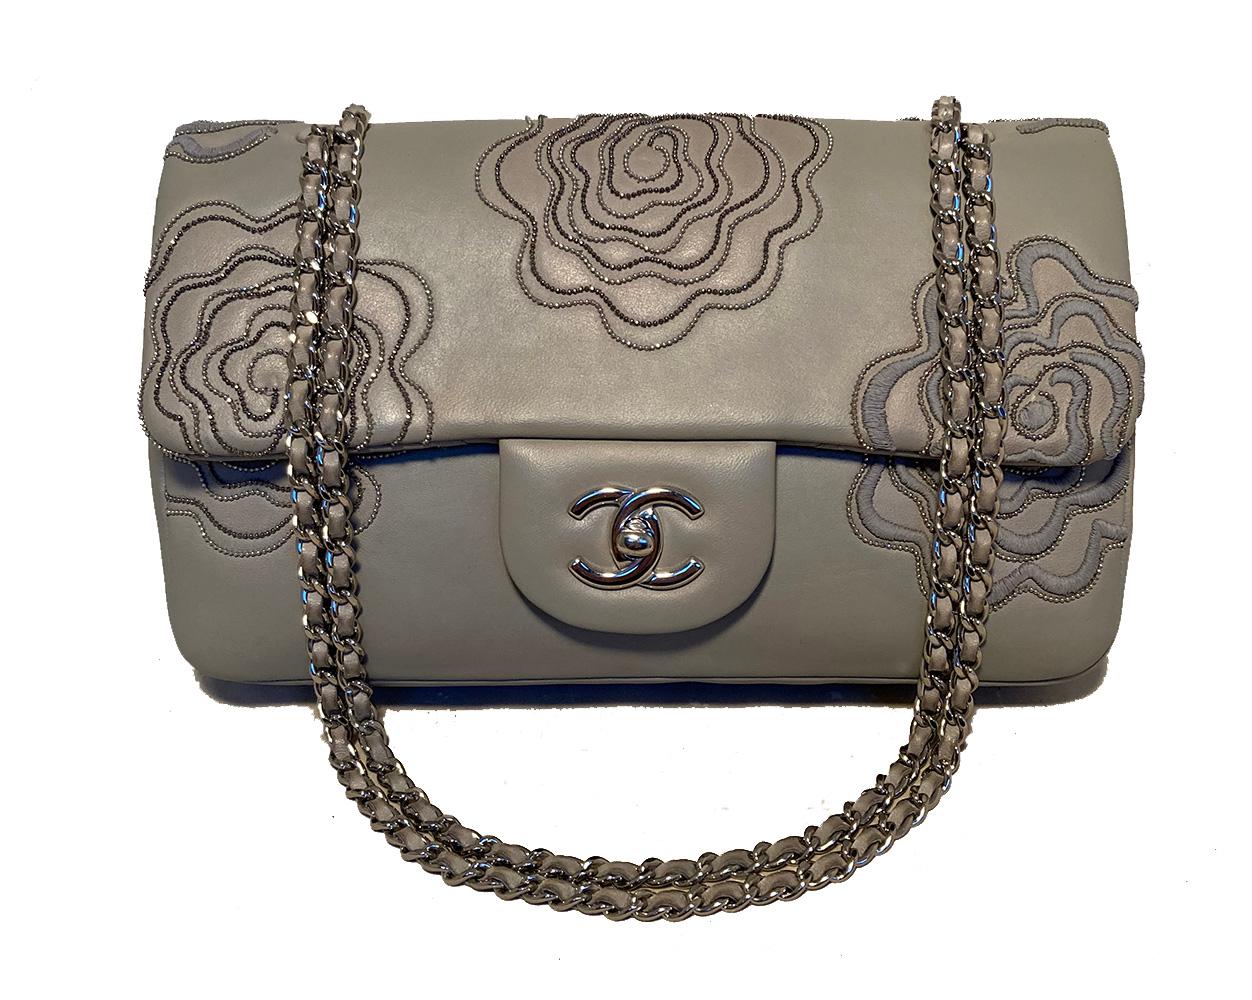 Chanel Camellia Follies Embroidered Medium Classic Flap Excellent condition. measurements: 10x6x2